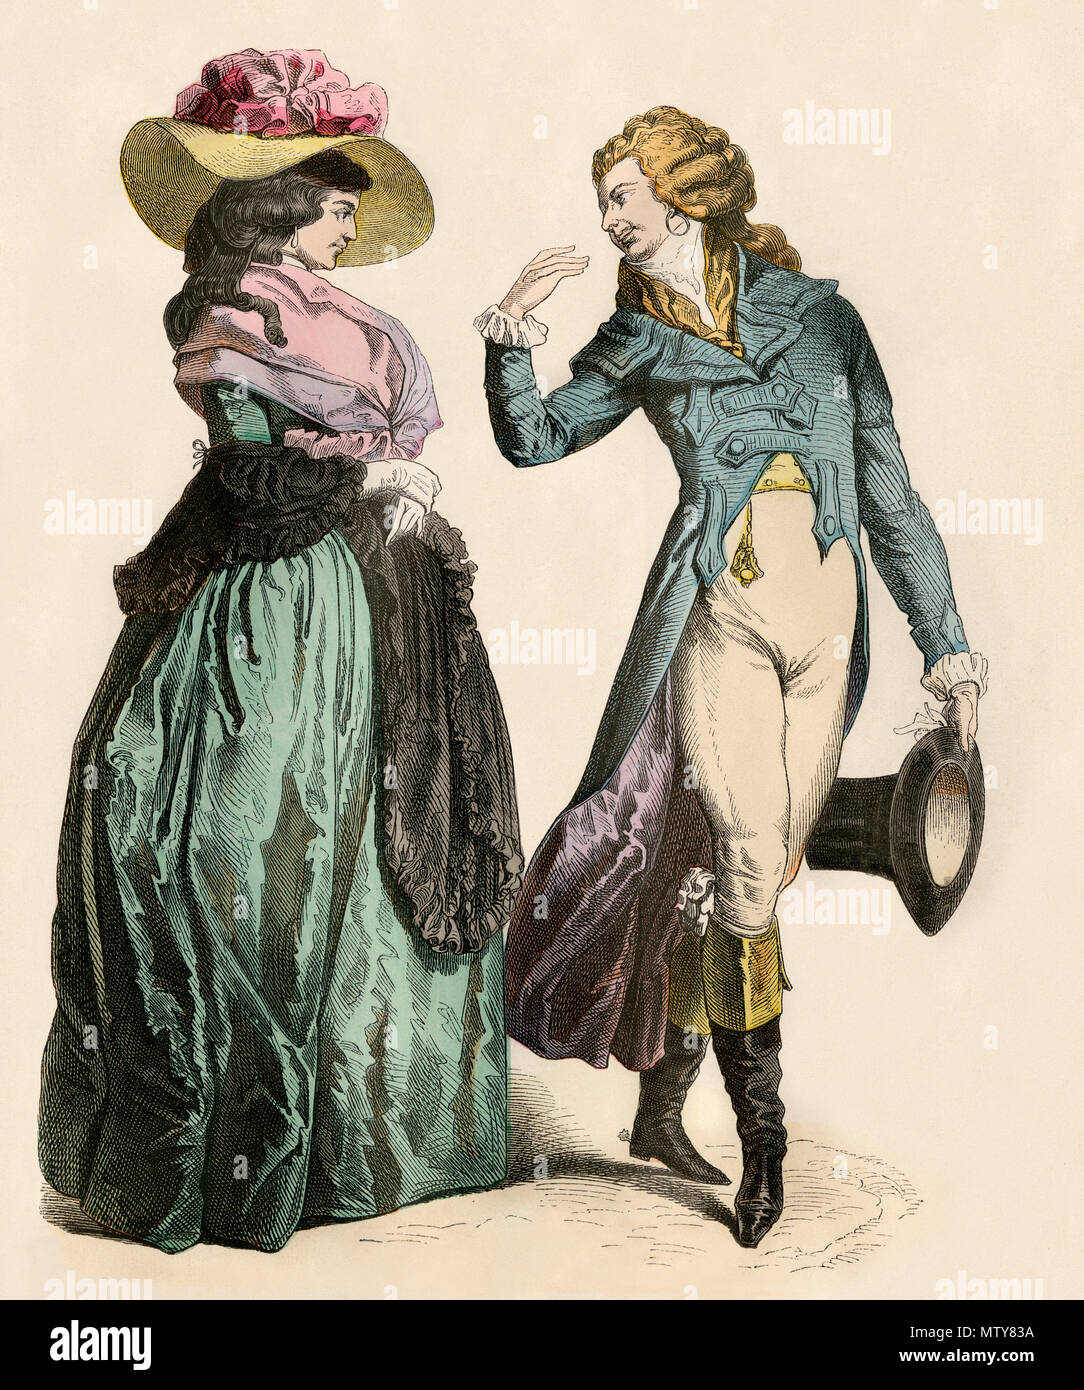 German man greeting a woman, 1700s. Hand-colored print Stock Photo